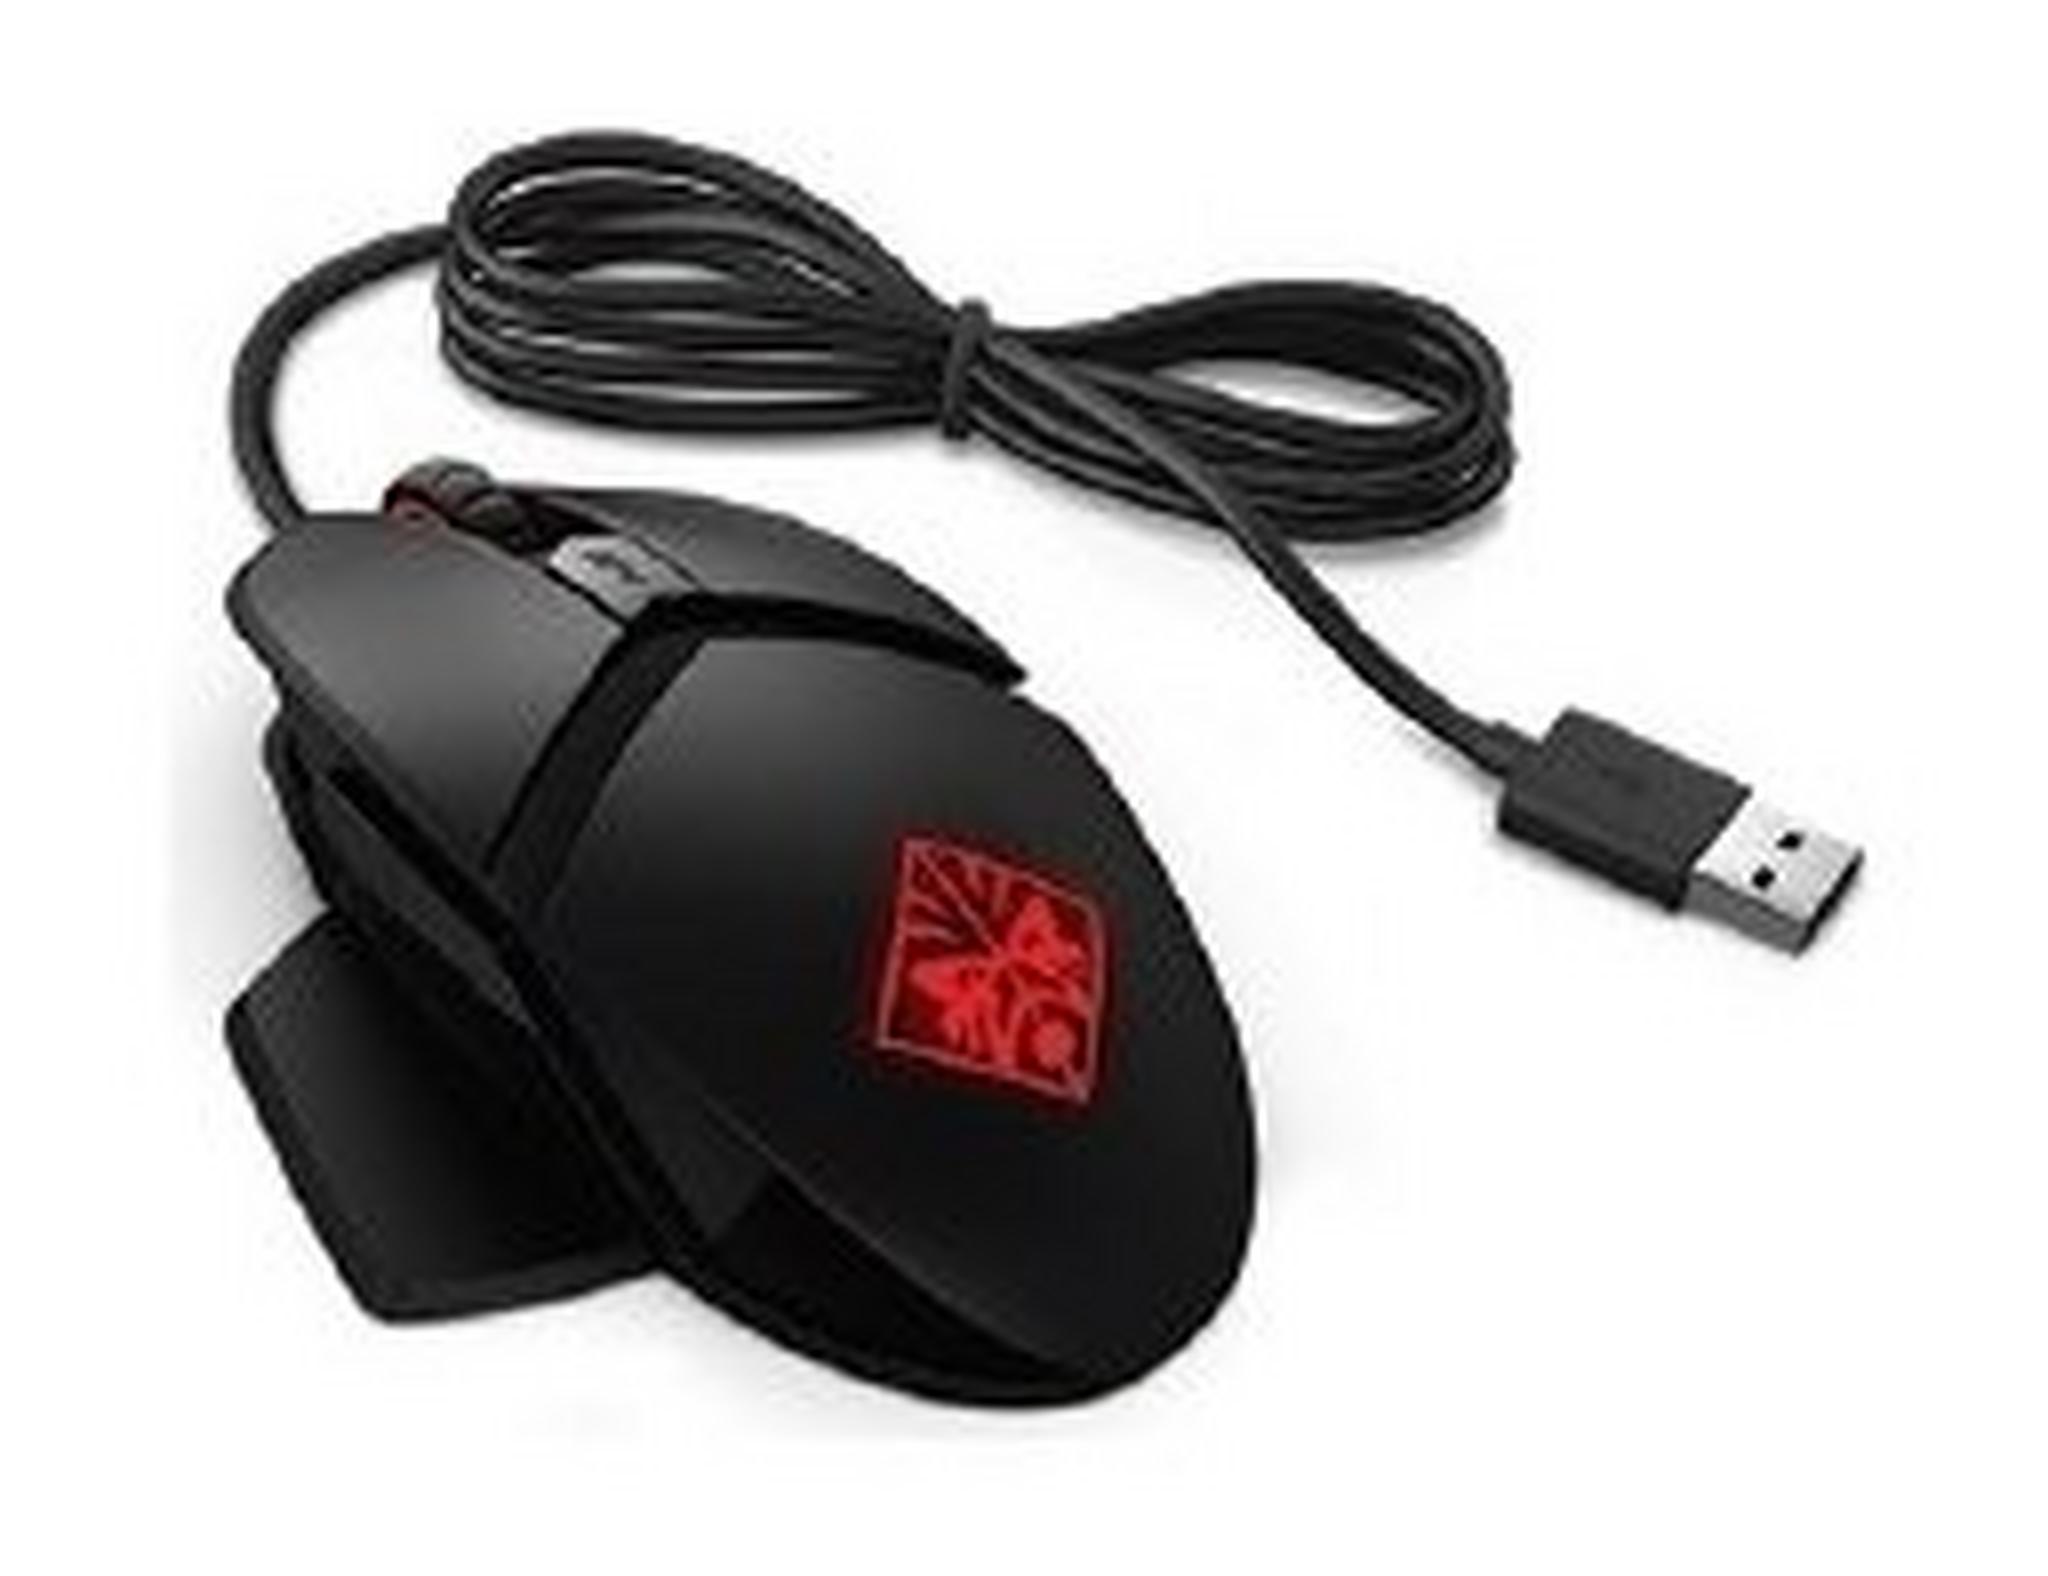 HP Omen Reactor Wired Gaming Mouse - Black